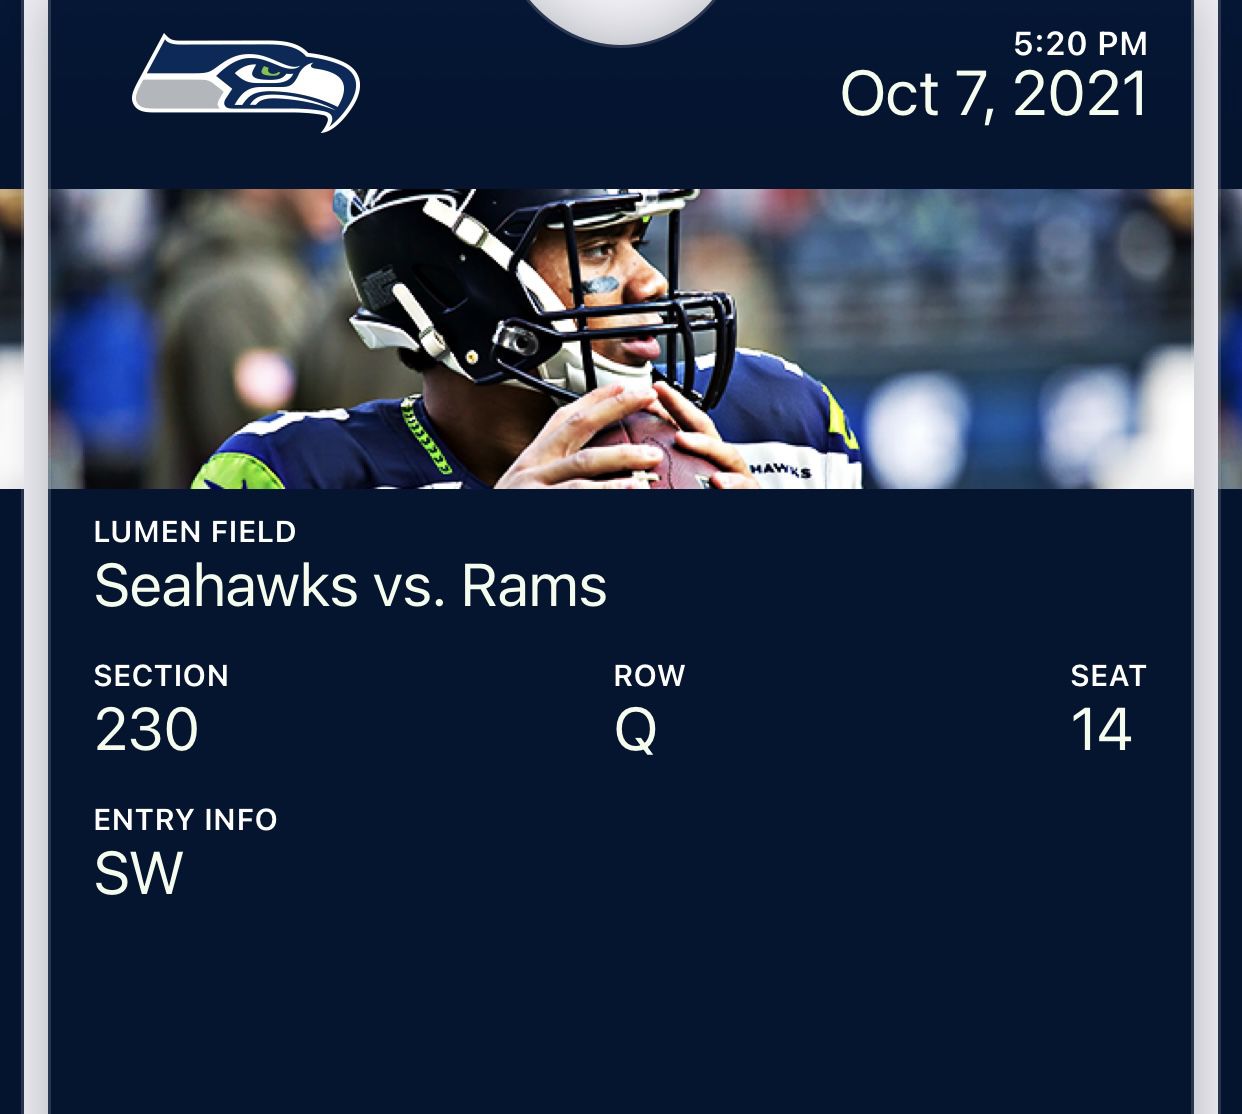 Seahawks Vs Rams Ticket- Lower 200 Level Undercover - 1x Great